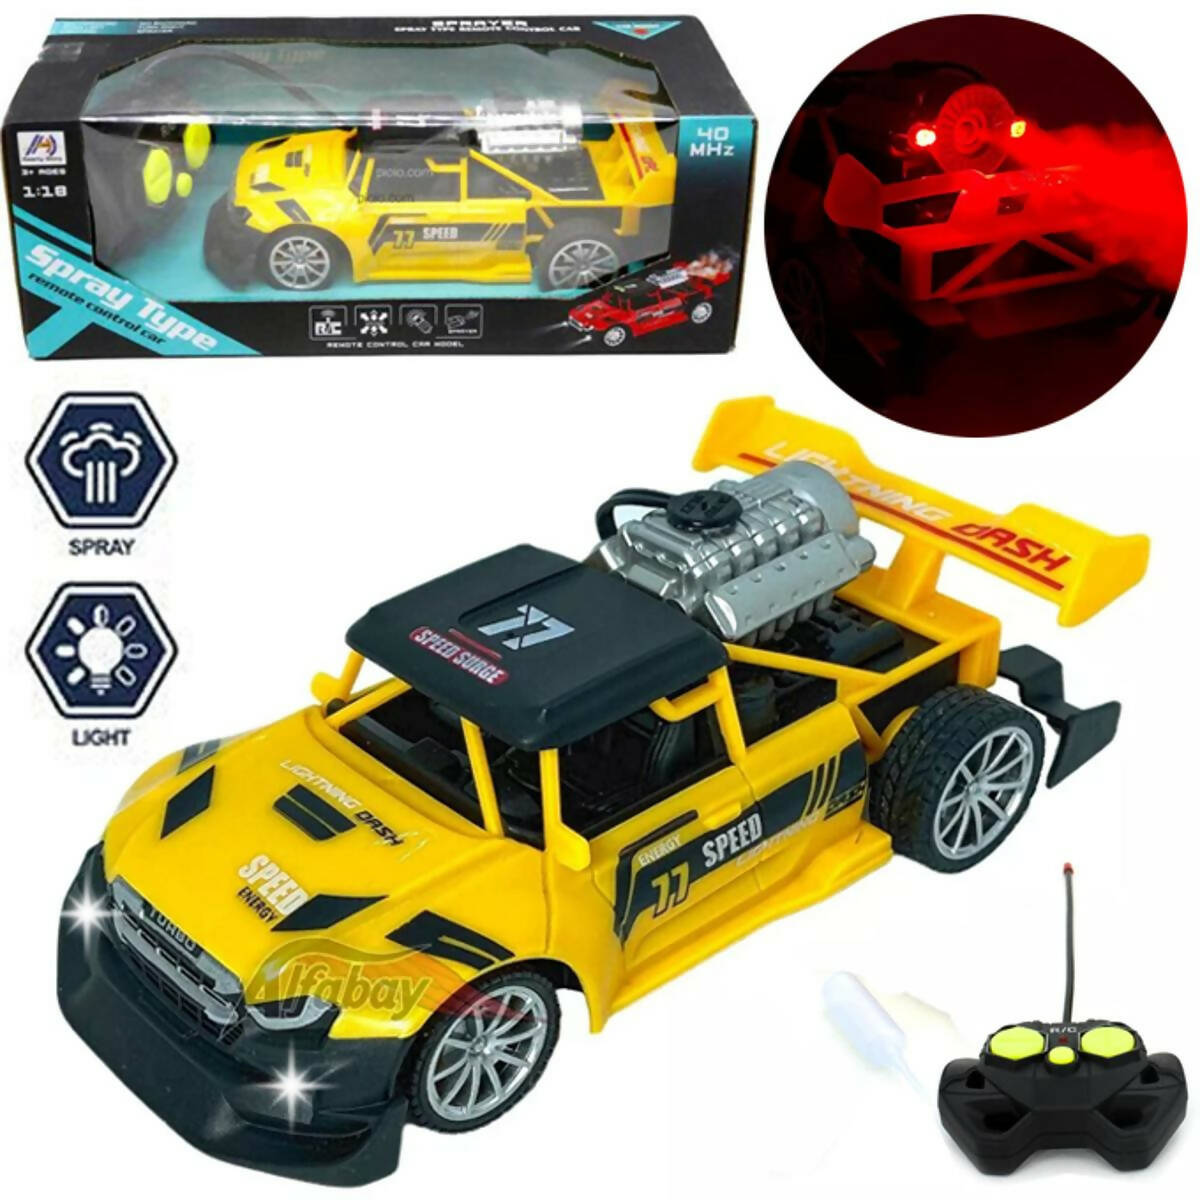 Remote Control Rock Monster Car with Lights & Flame Spray Function Stunt Car - Operated Battery - Yellow